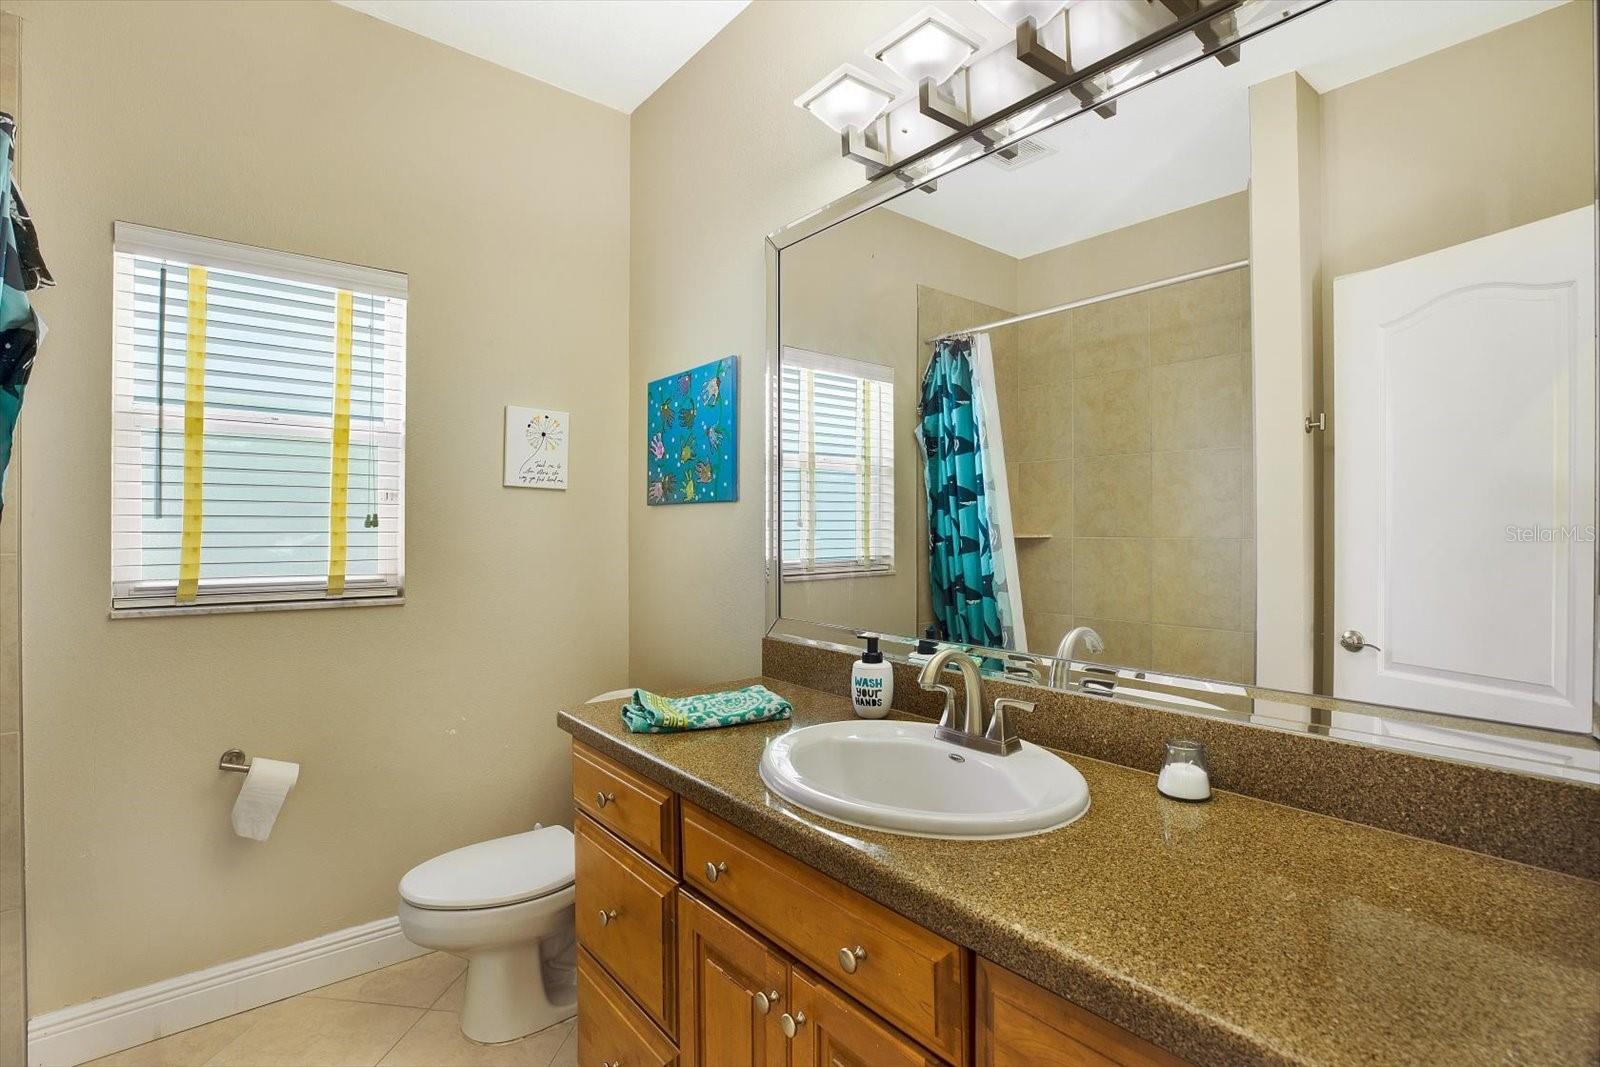 An updated full bath with a tub and shower combo is located between the two bedrooms